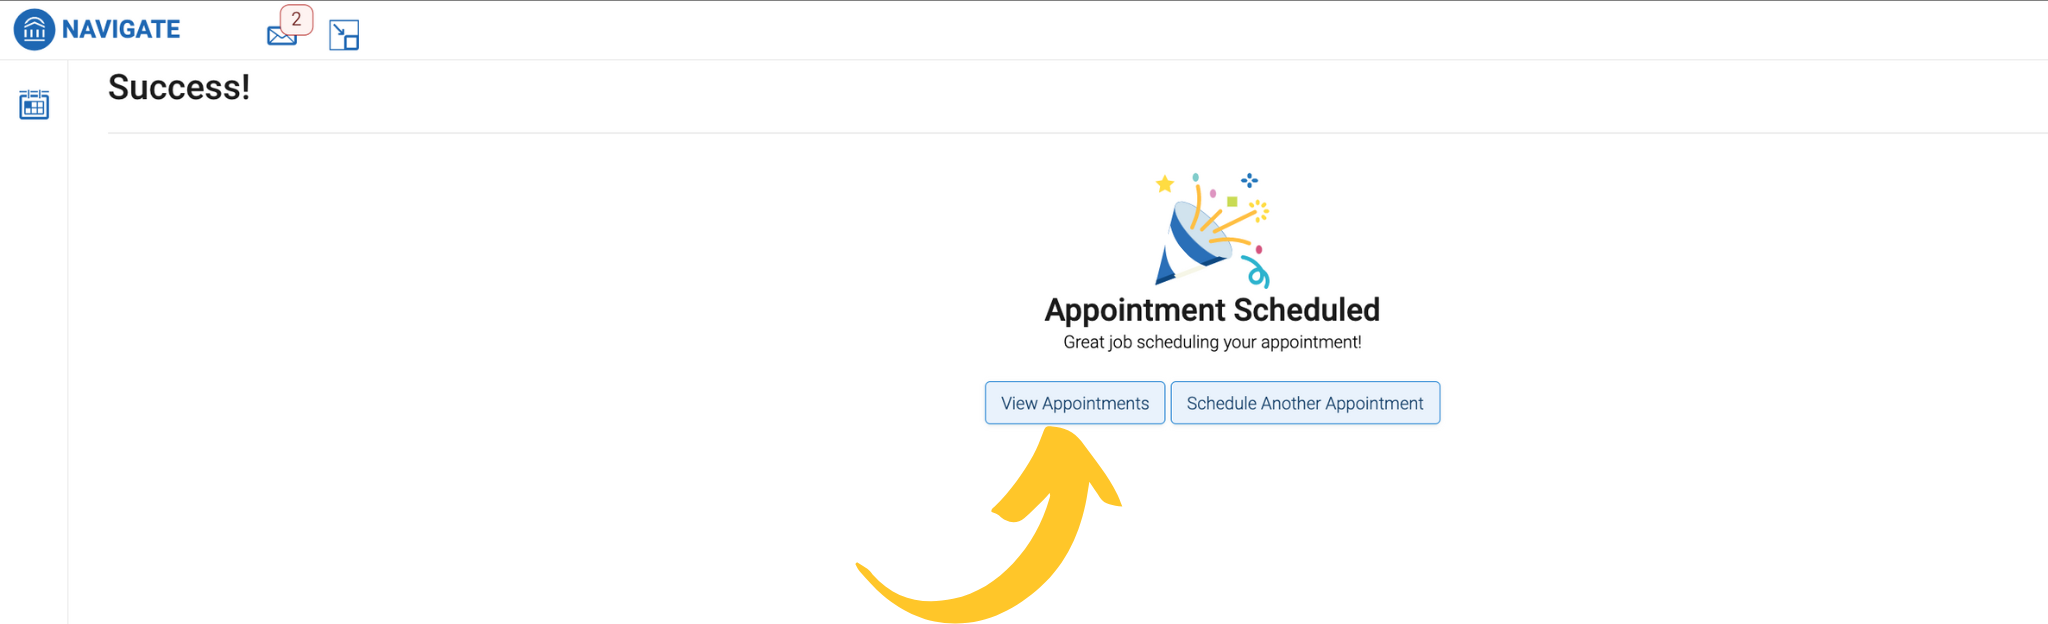 View Appointments